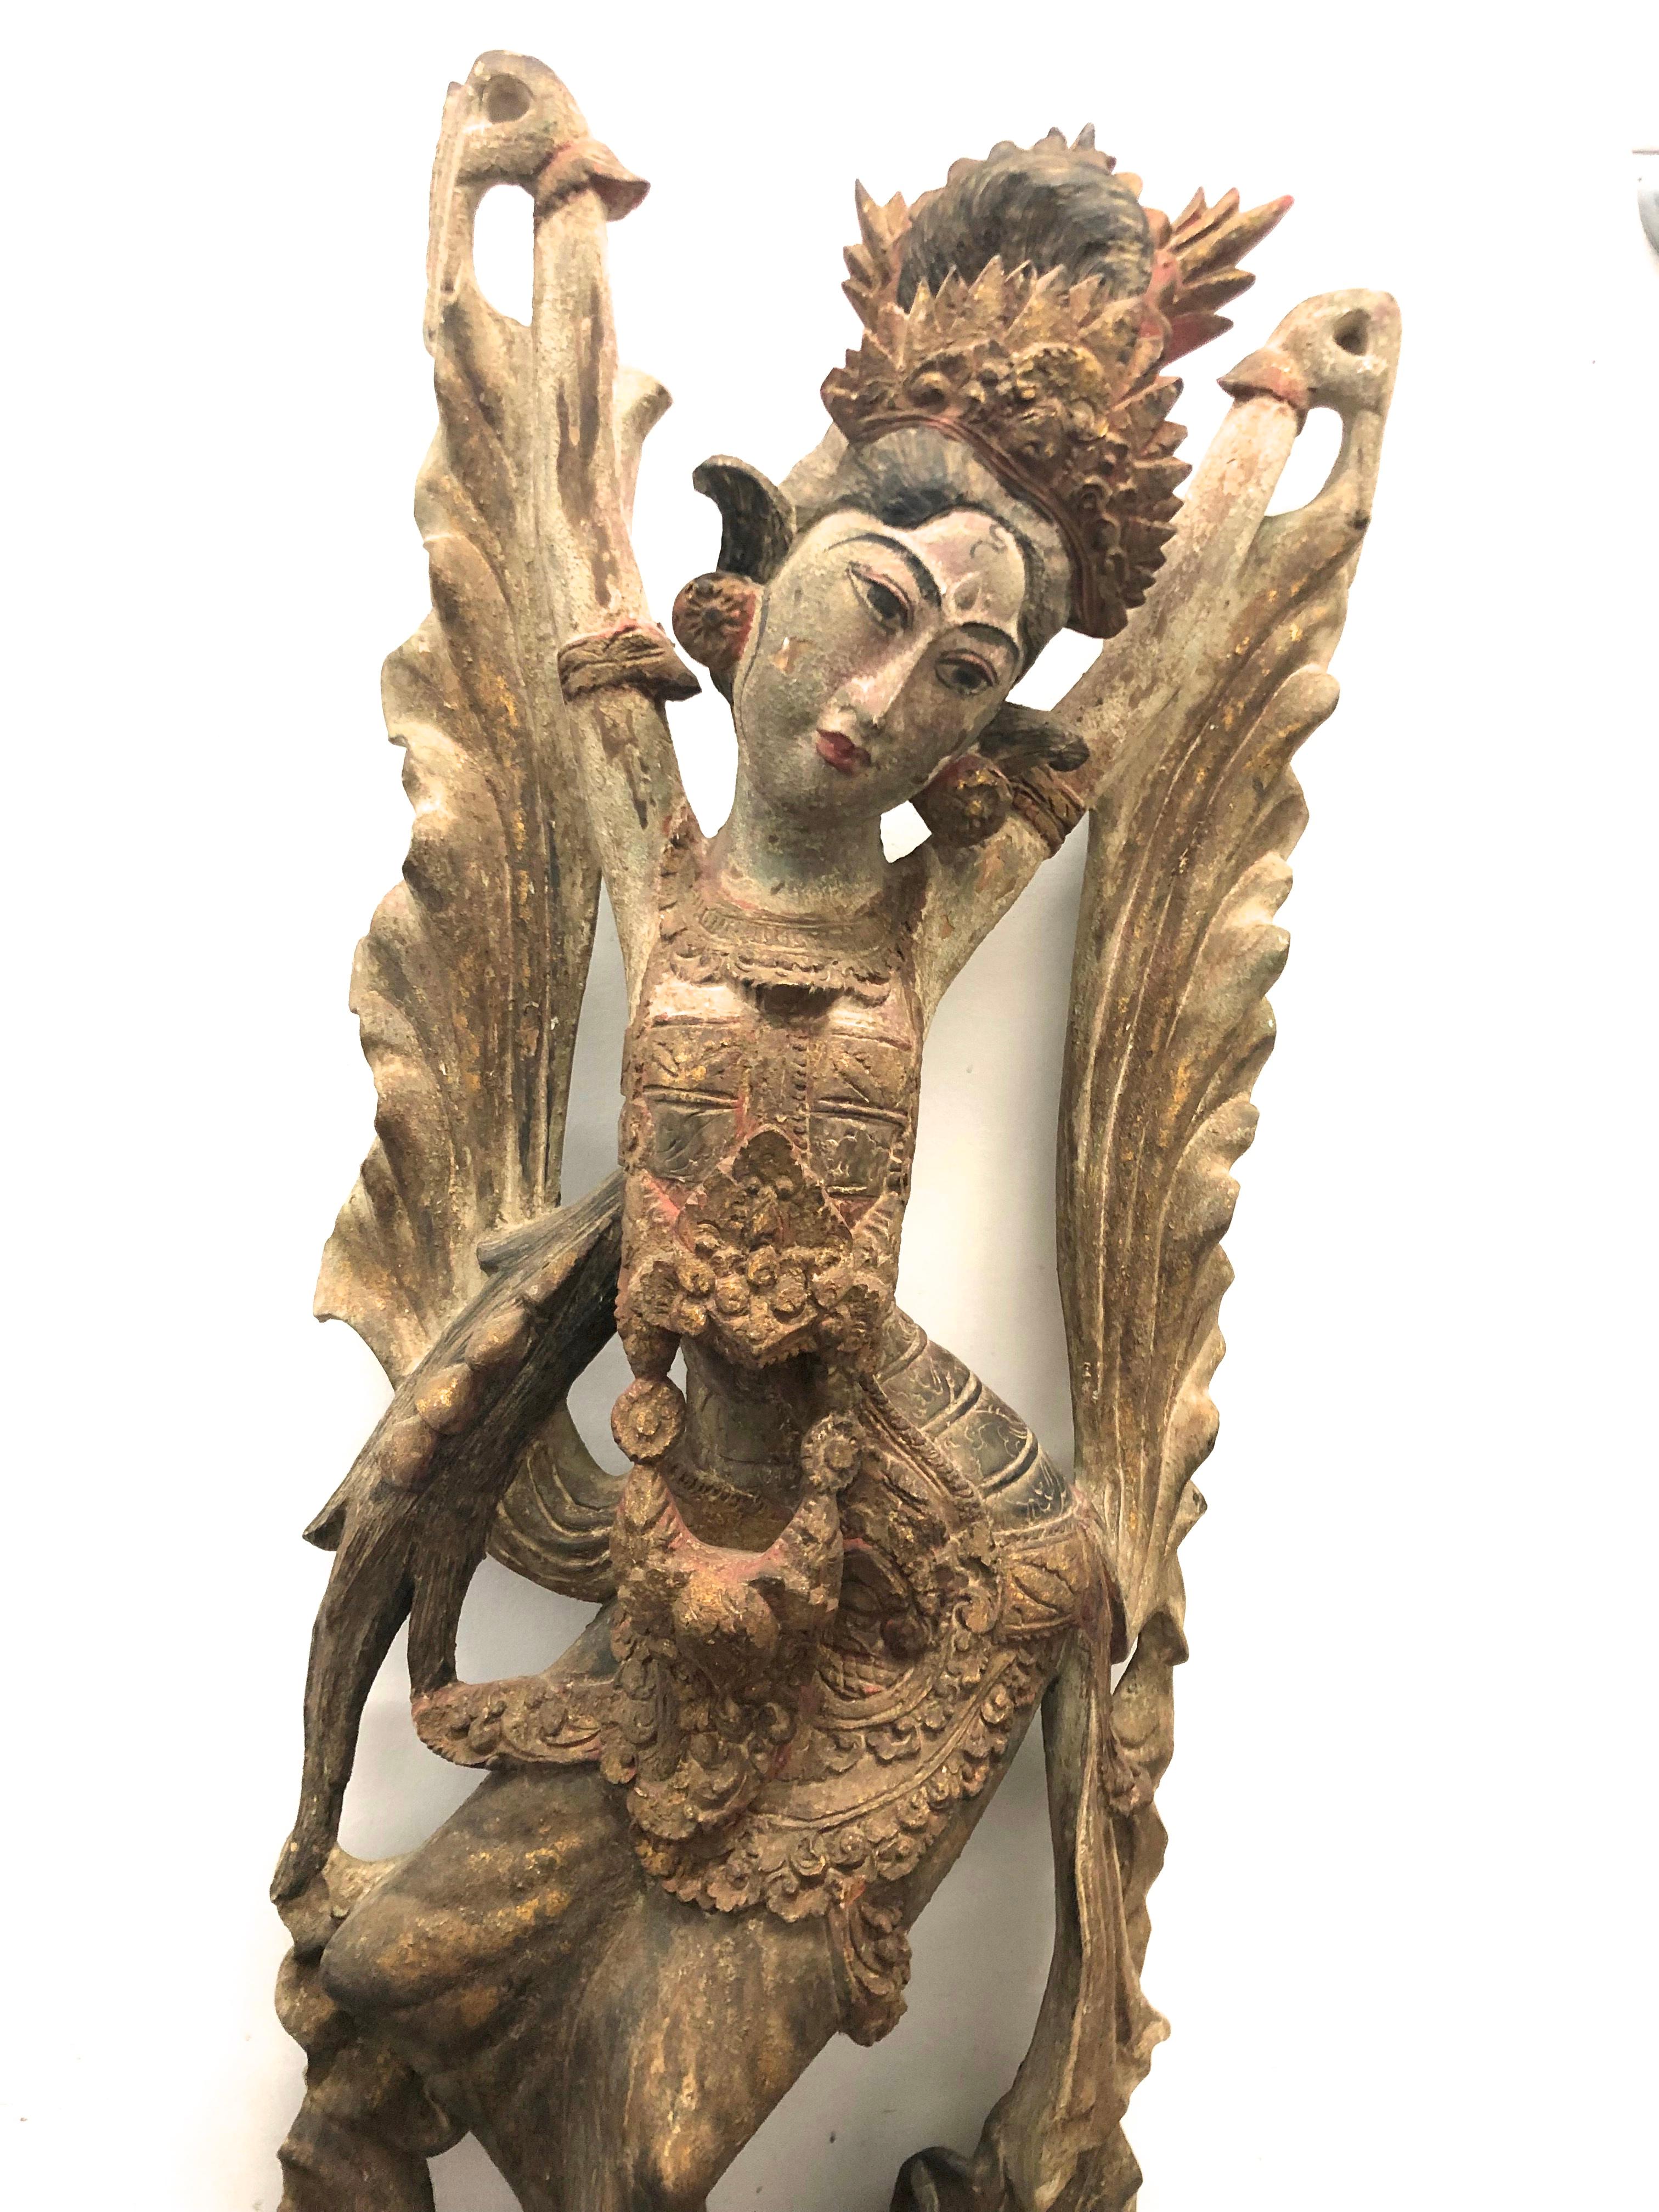 Large Wood Sculpture of a Dancer, Bali early 20th century.
Hand carved jackfruit wood sculpture of a Balinese traditional Legong Dancer.
41 inches tall 15 inches wide and 8 deep
